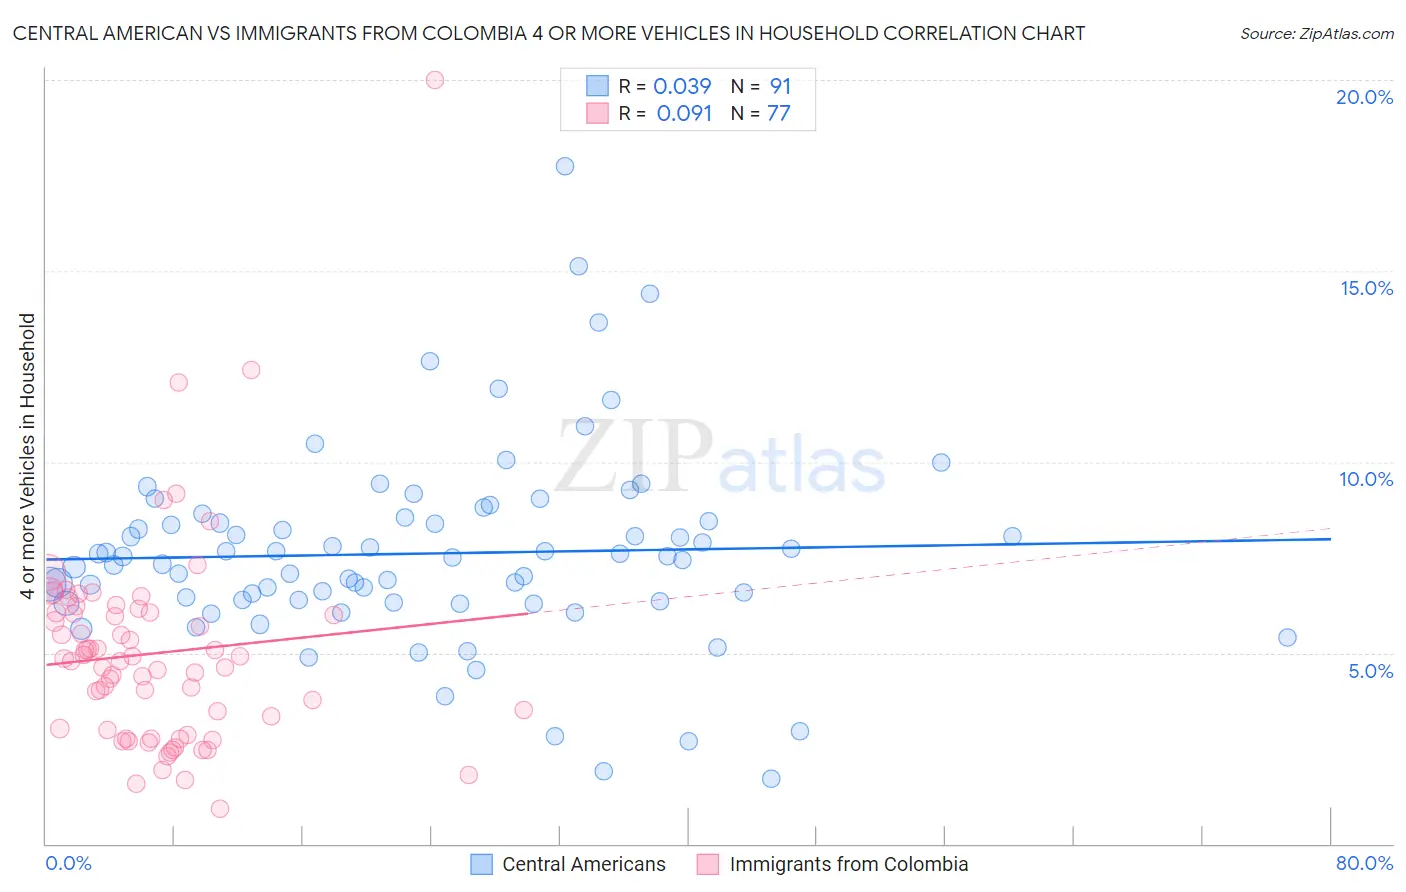 Central American vs Immigrants from Colombia 4 or more Vehicles in Household